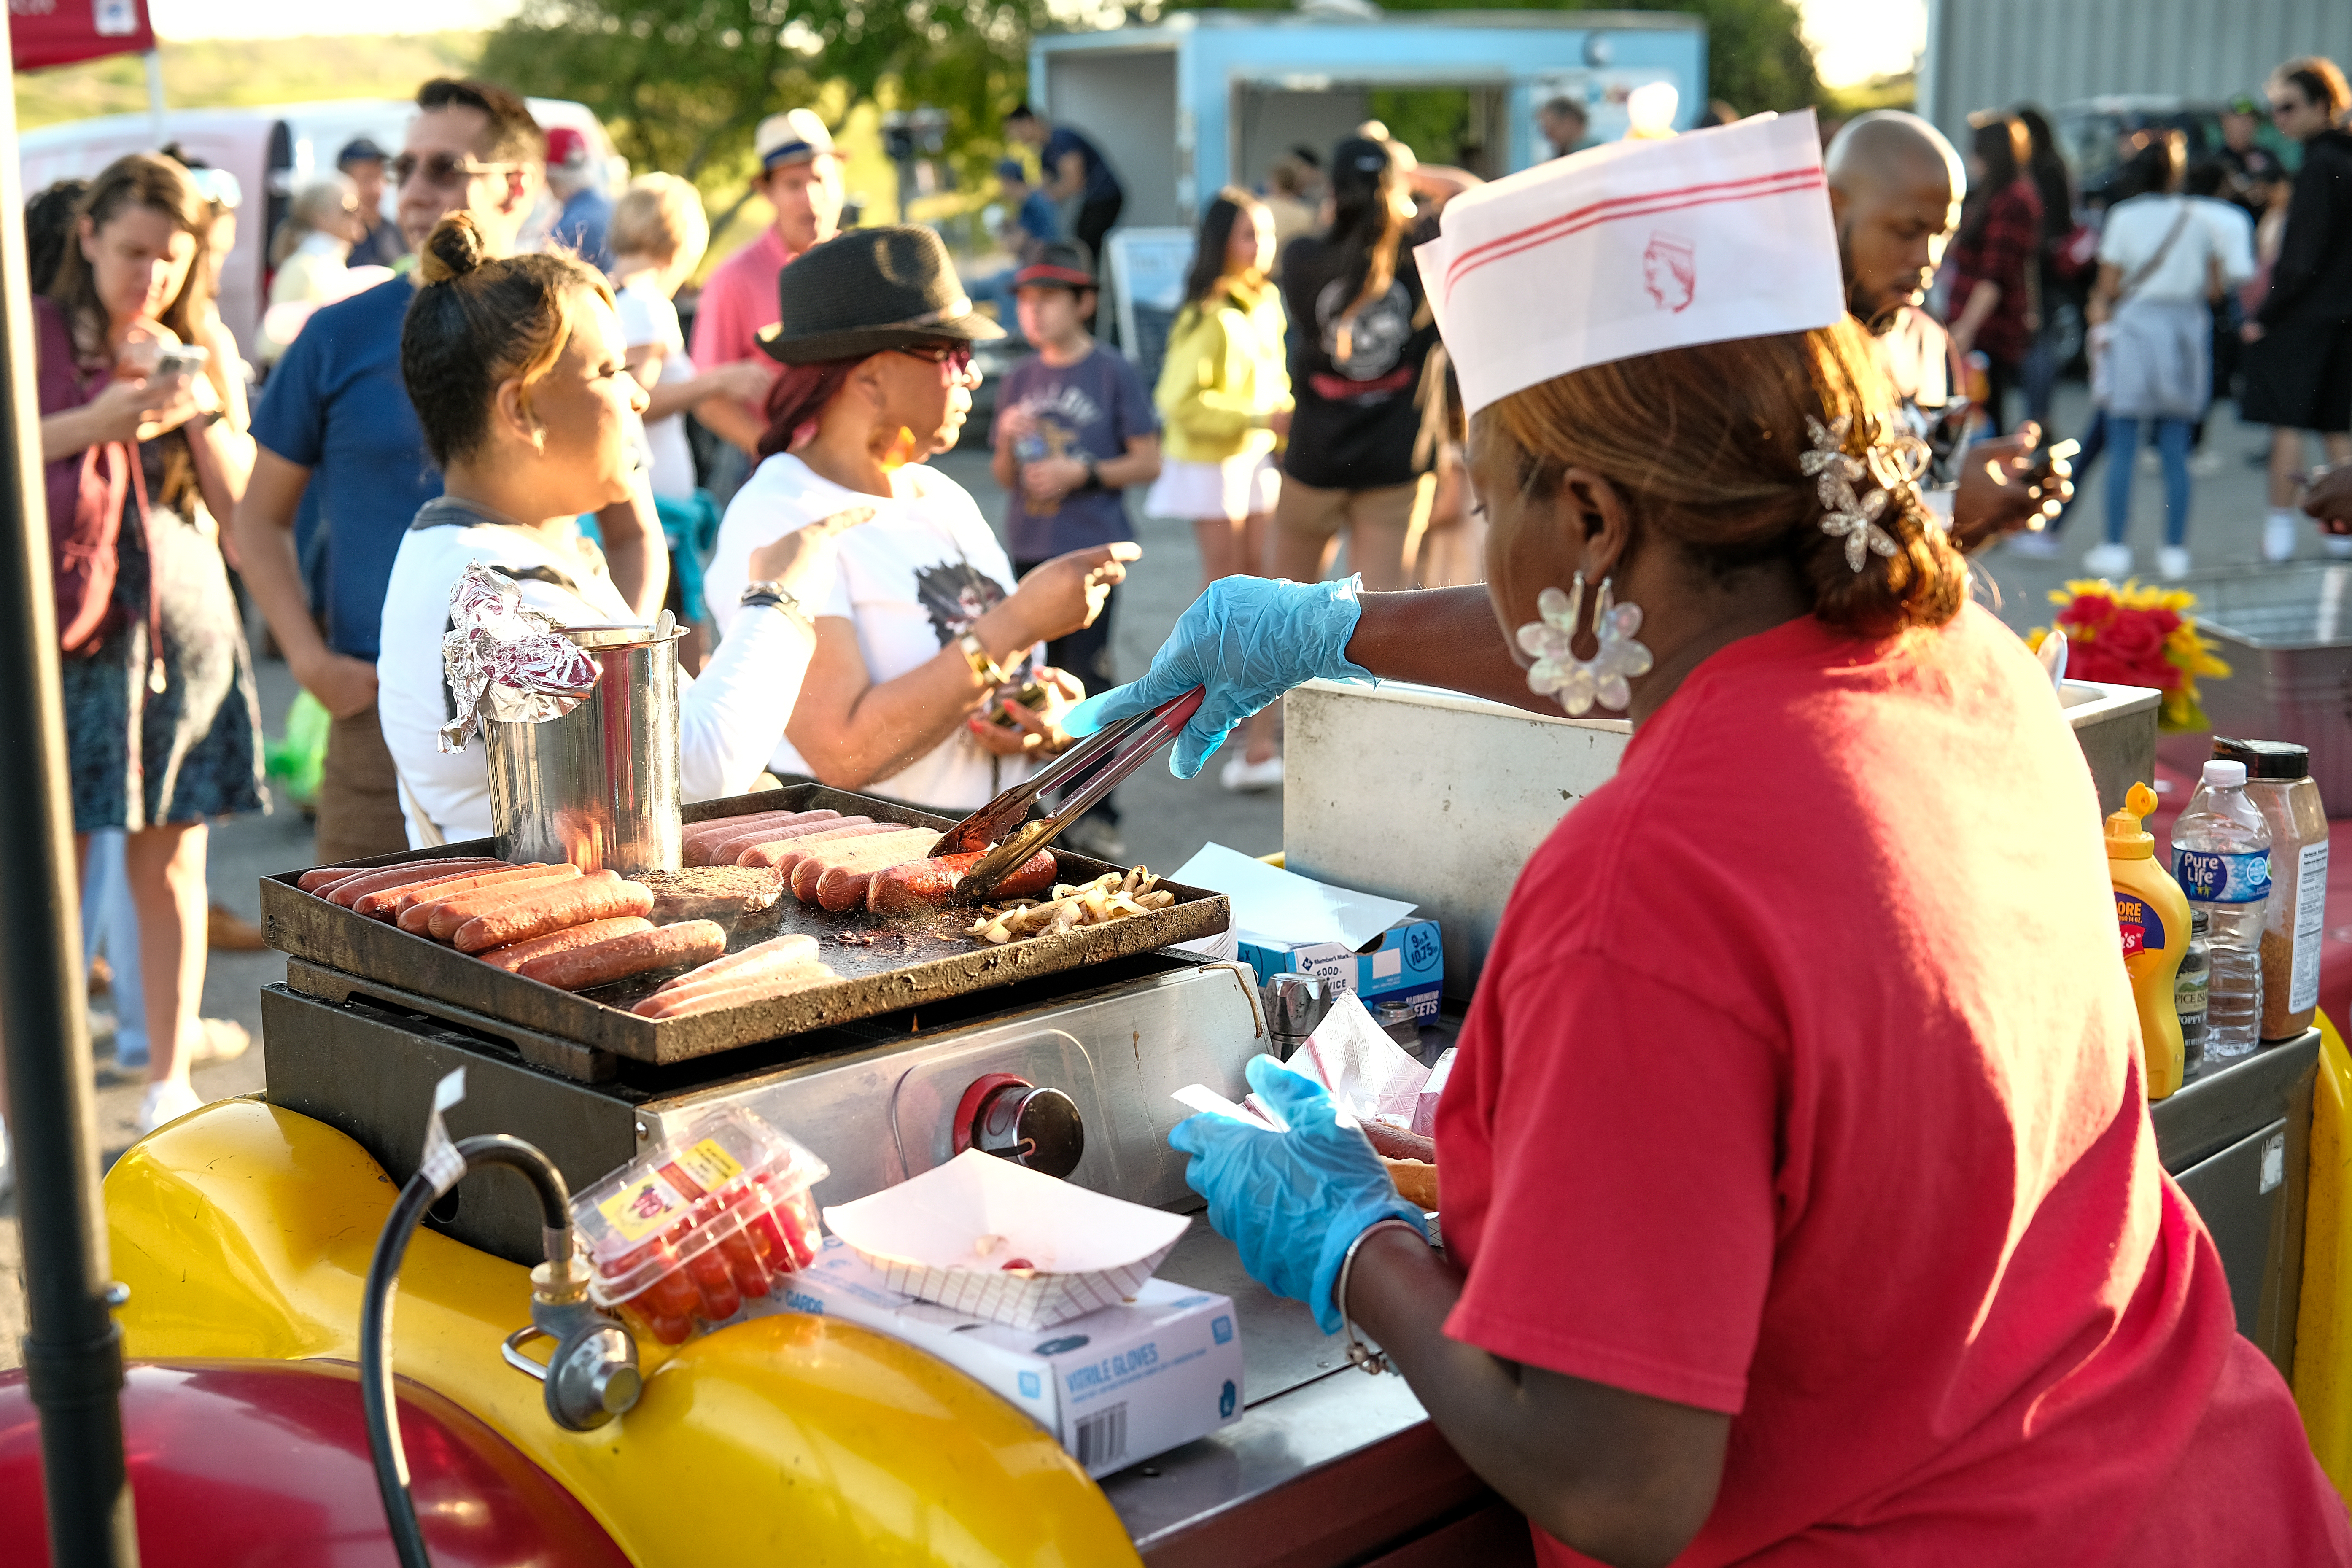 A food vendor, Dogs on Wheels, cooks hotdogs & sausages 